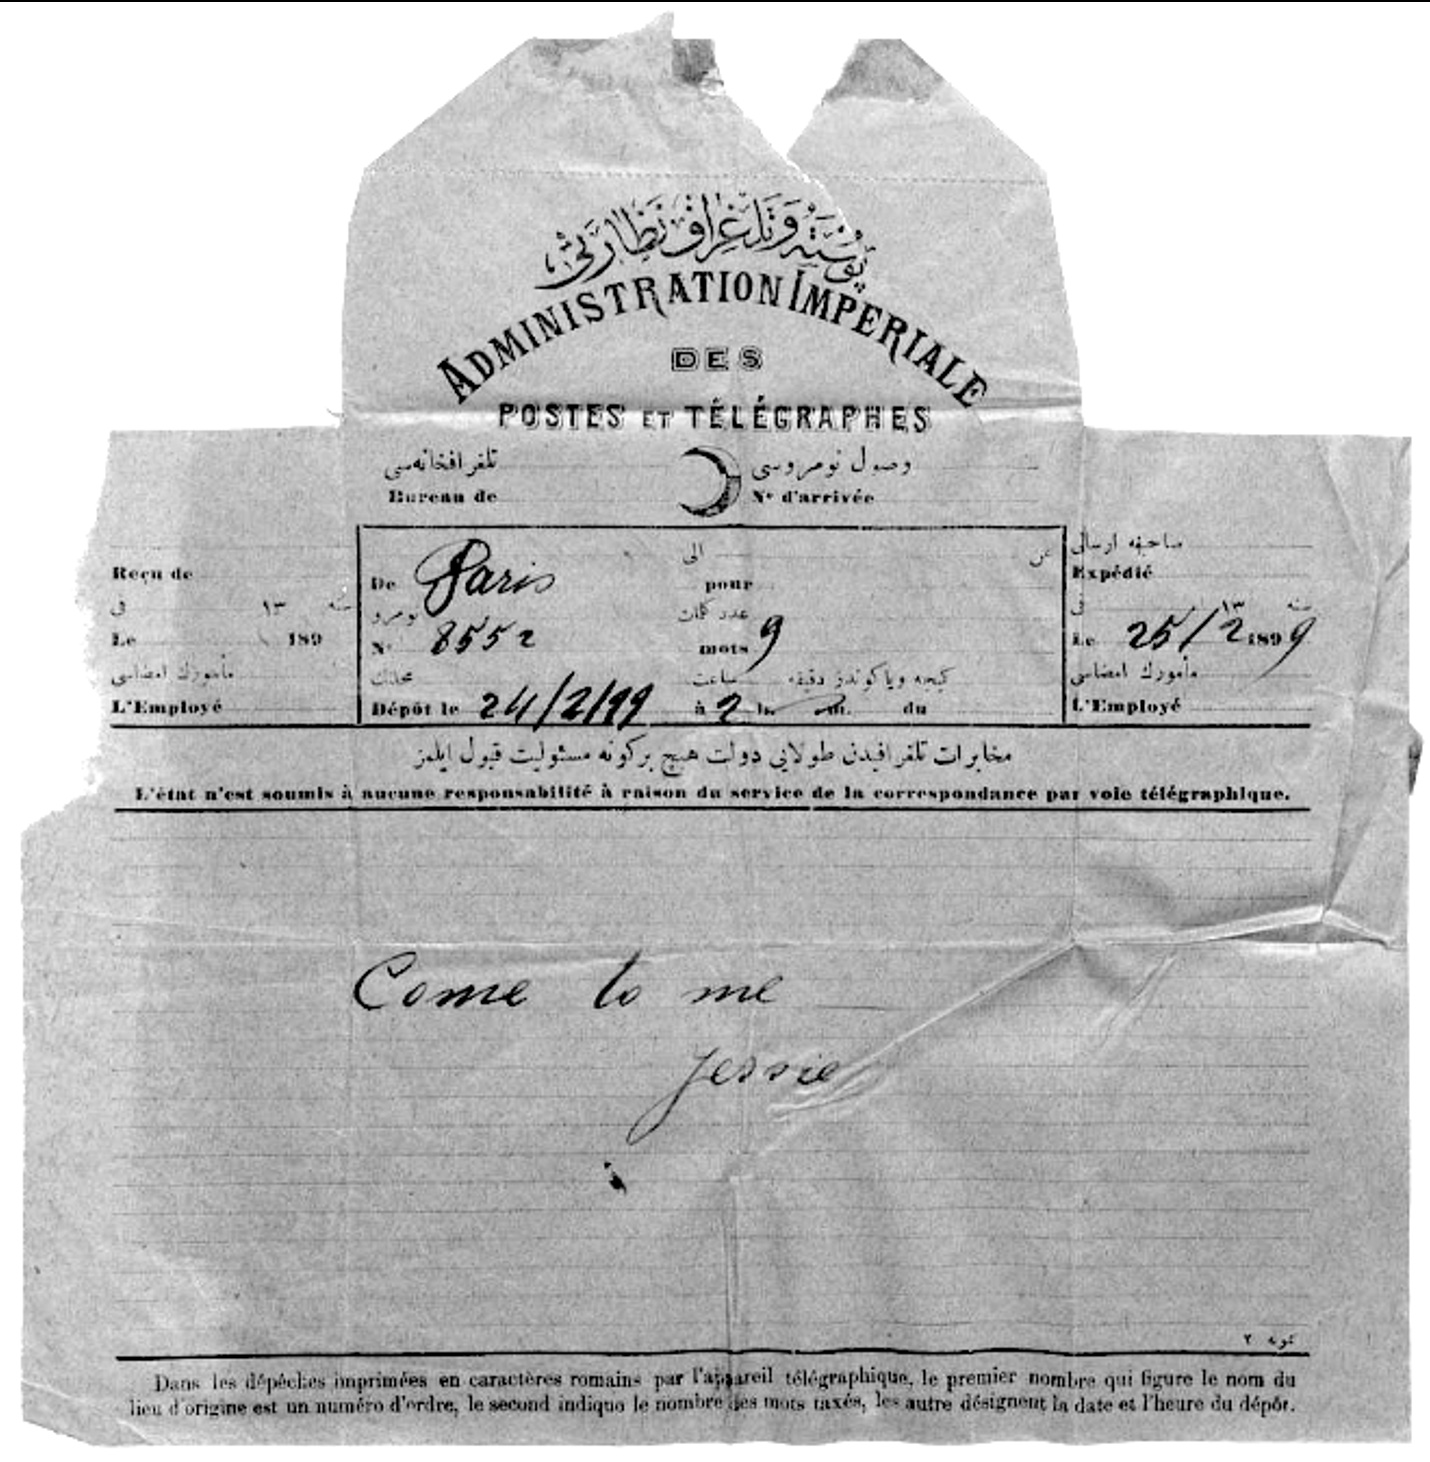 Black-and-white scan of an opened French telegram (the imprint reads "Administration Imperiale des Postes et Telegraphes" in French and Arabic. The handwritten message reads "Come to me / Jessie"